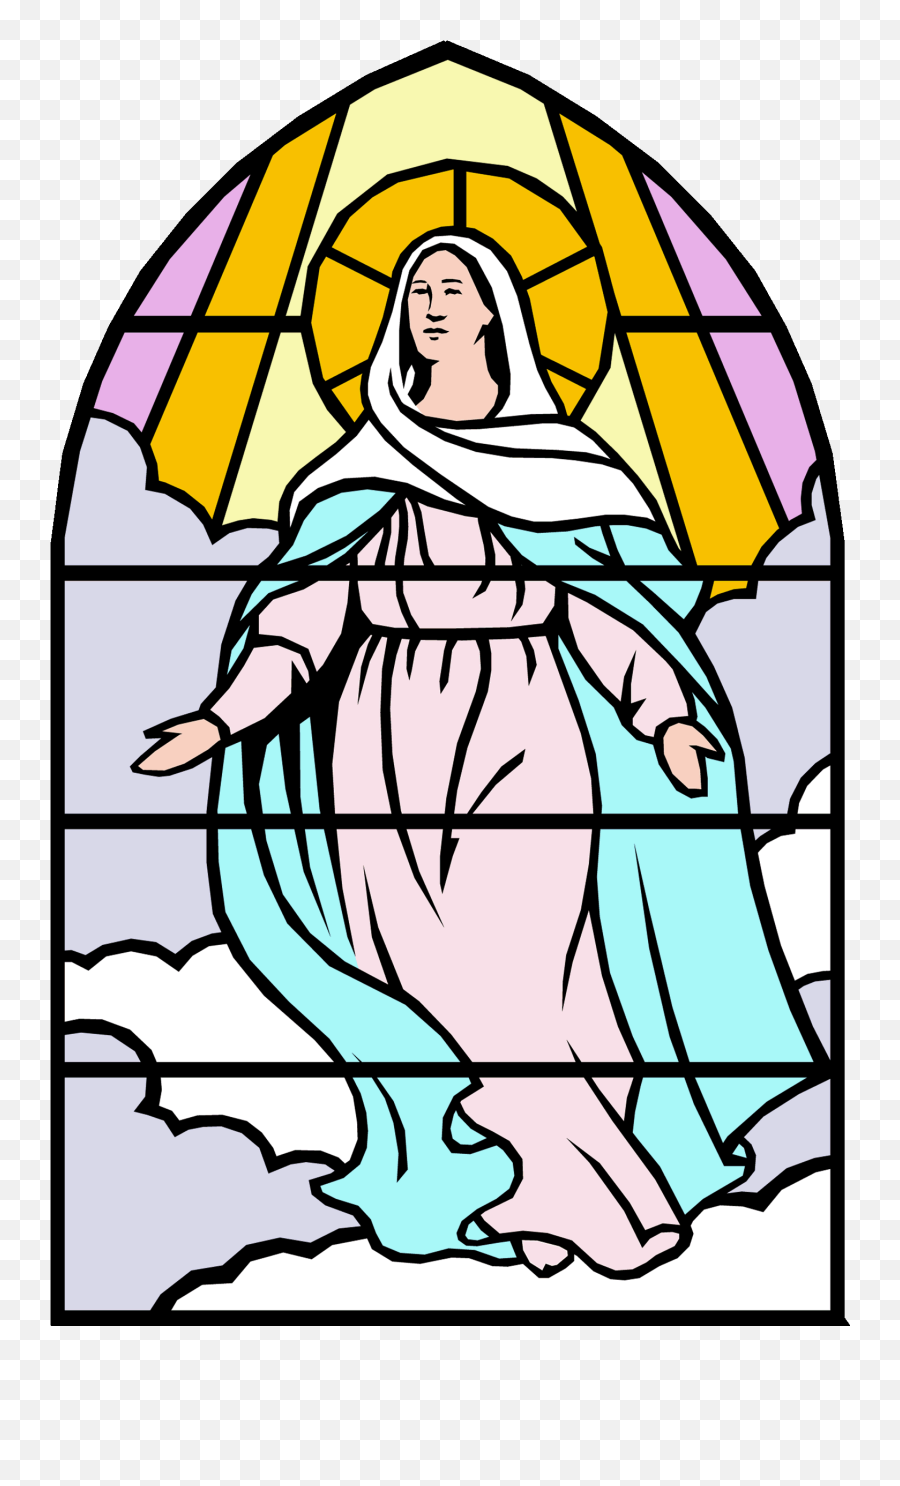 Download Clip Art Of Mary Catholic Png Image Clipart - Assumption Clip Art,Mary Png